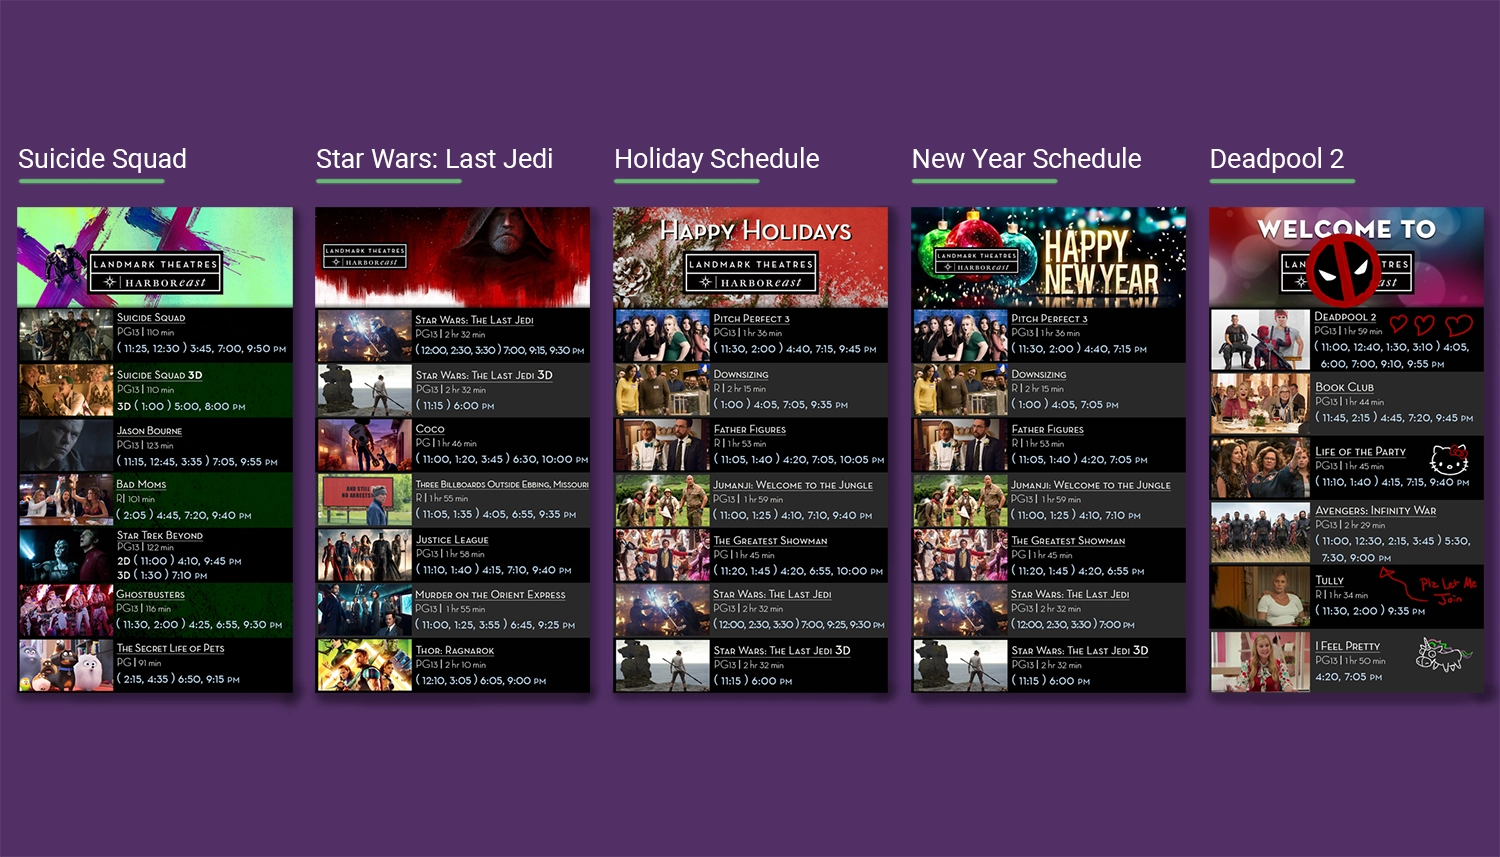 Big Movie and Holiday Schedules